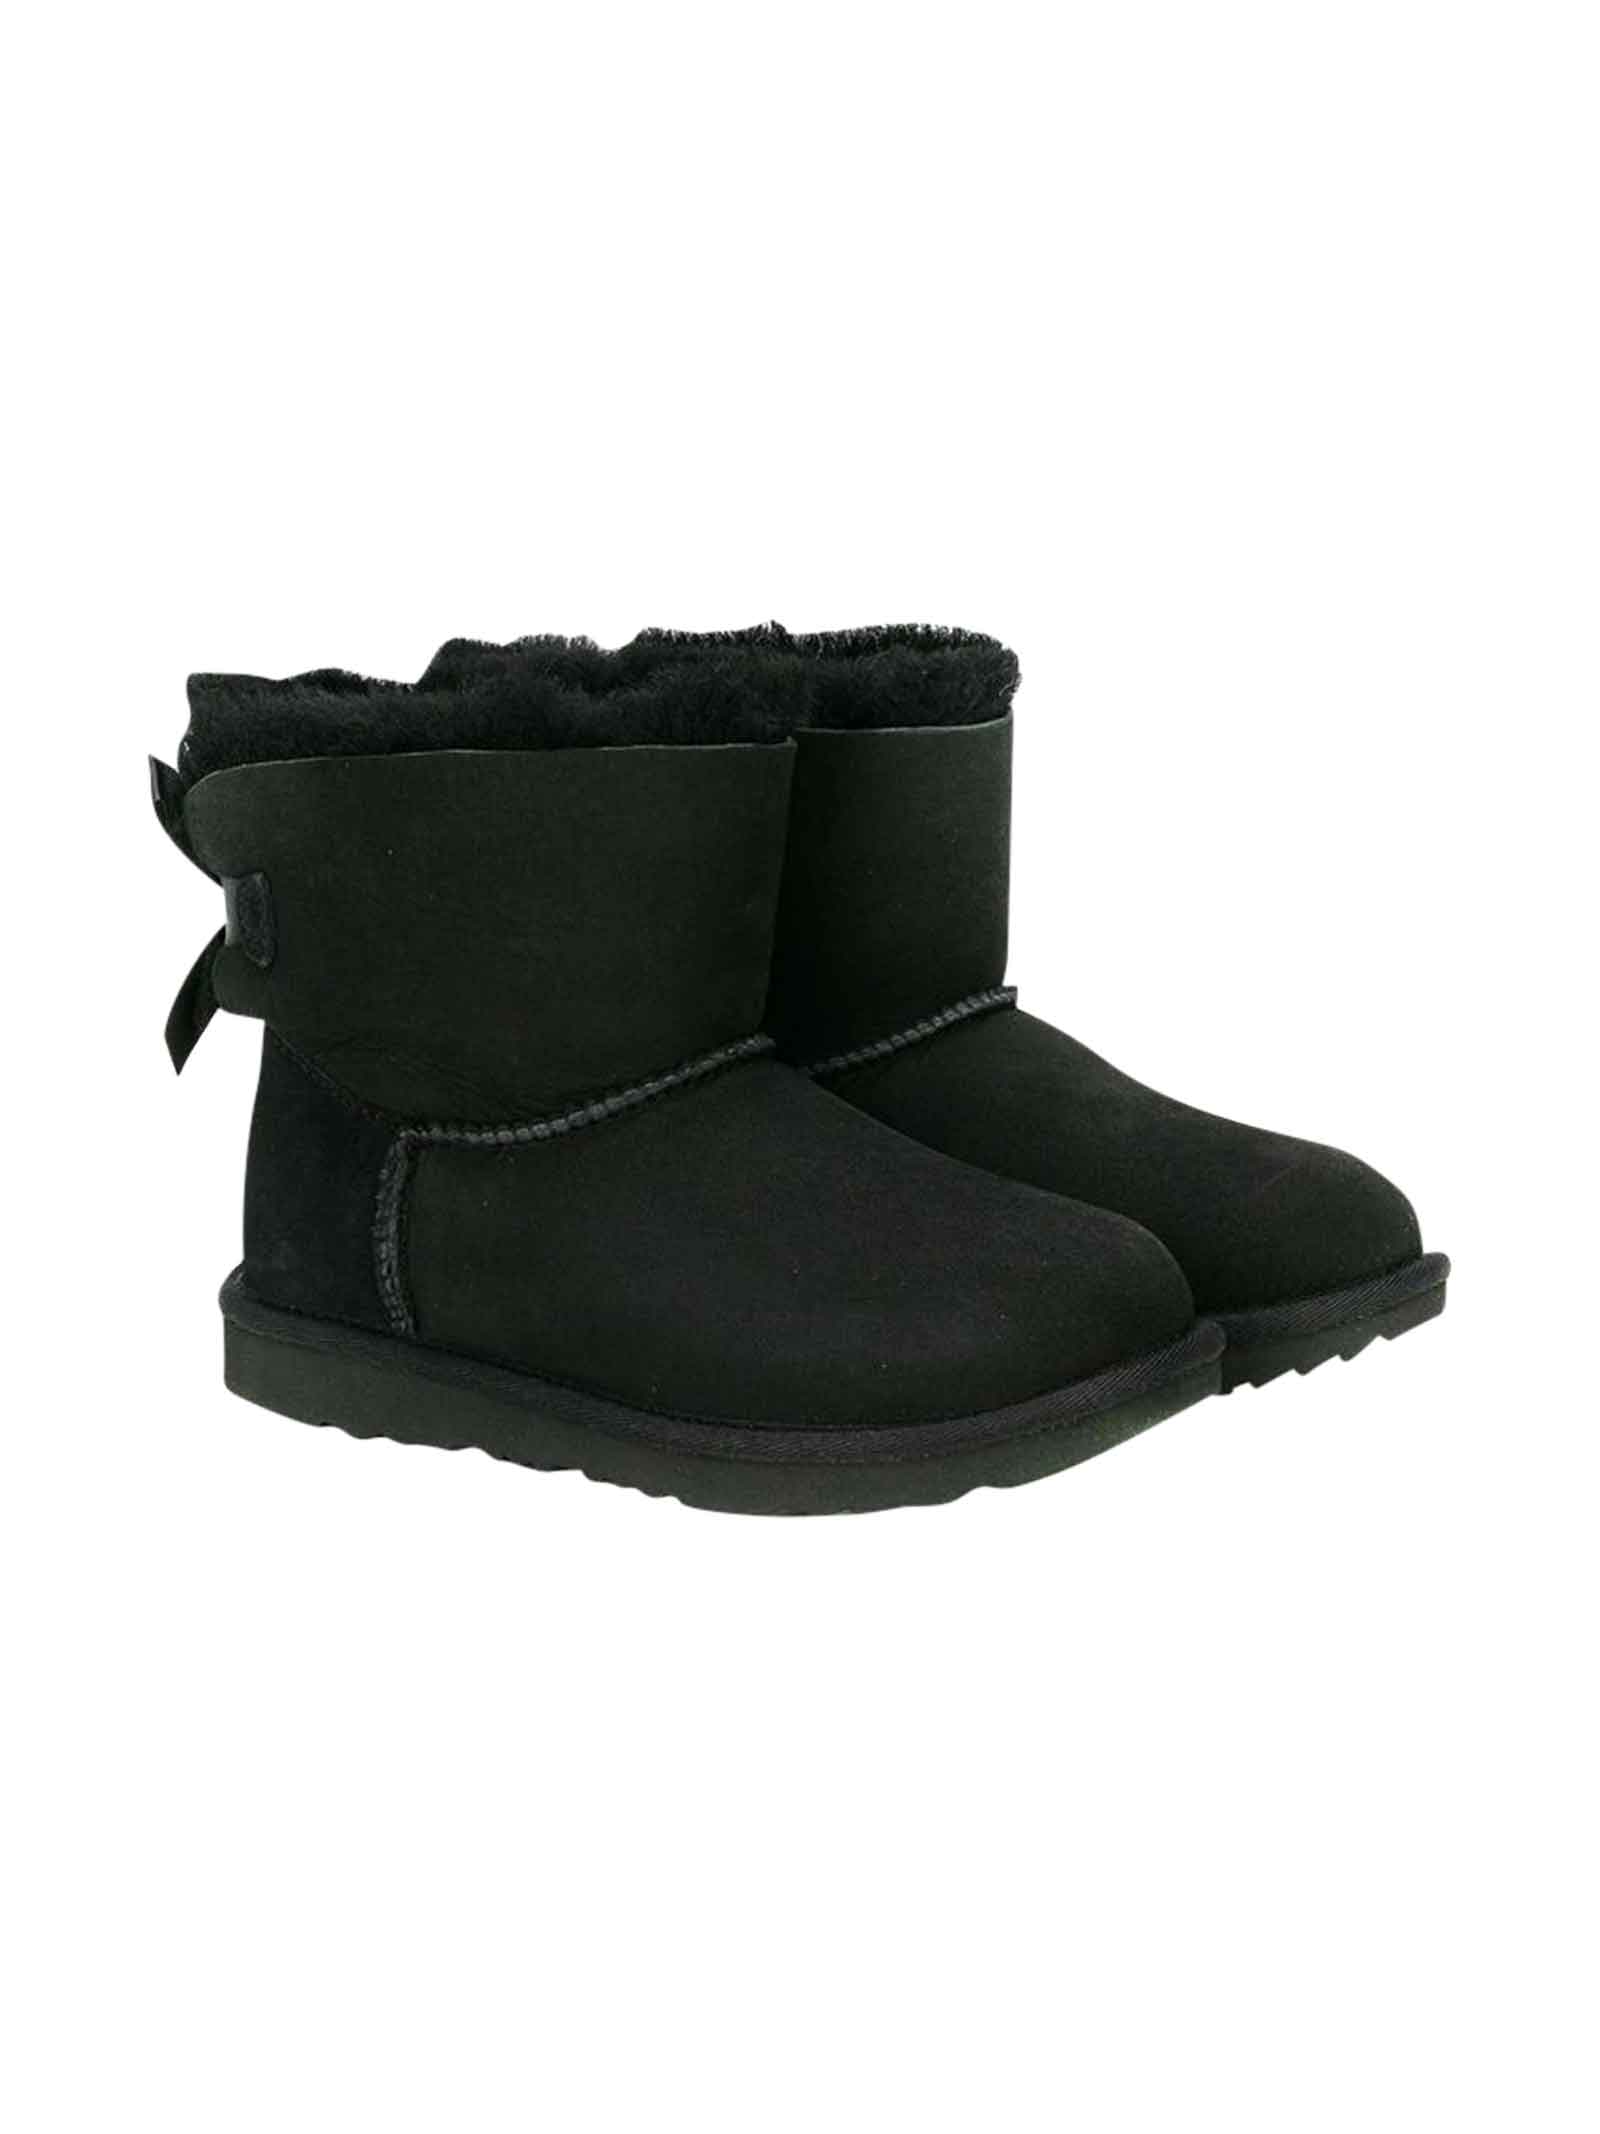 UGG Black Teen Ankle Boots